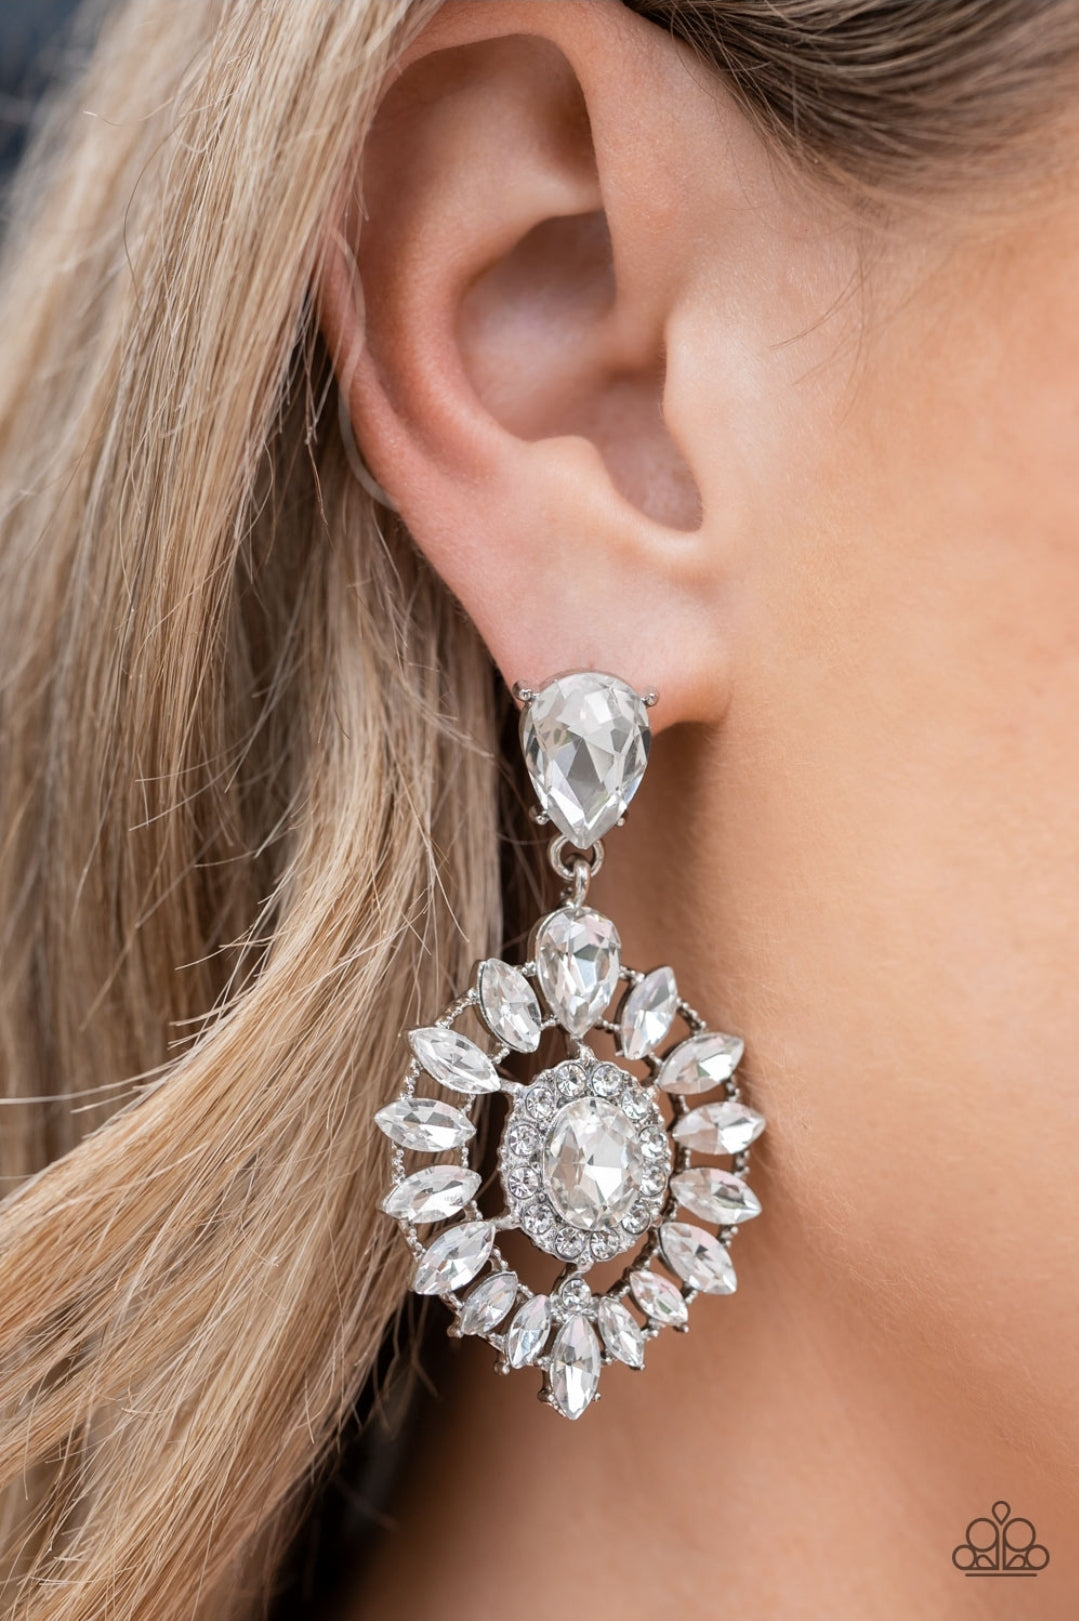 My Good LUXE Charm White Earrings August 2022 Life of the Party Exclusive - Princess Glam Shop